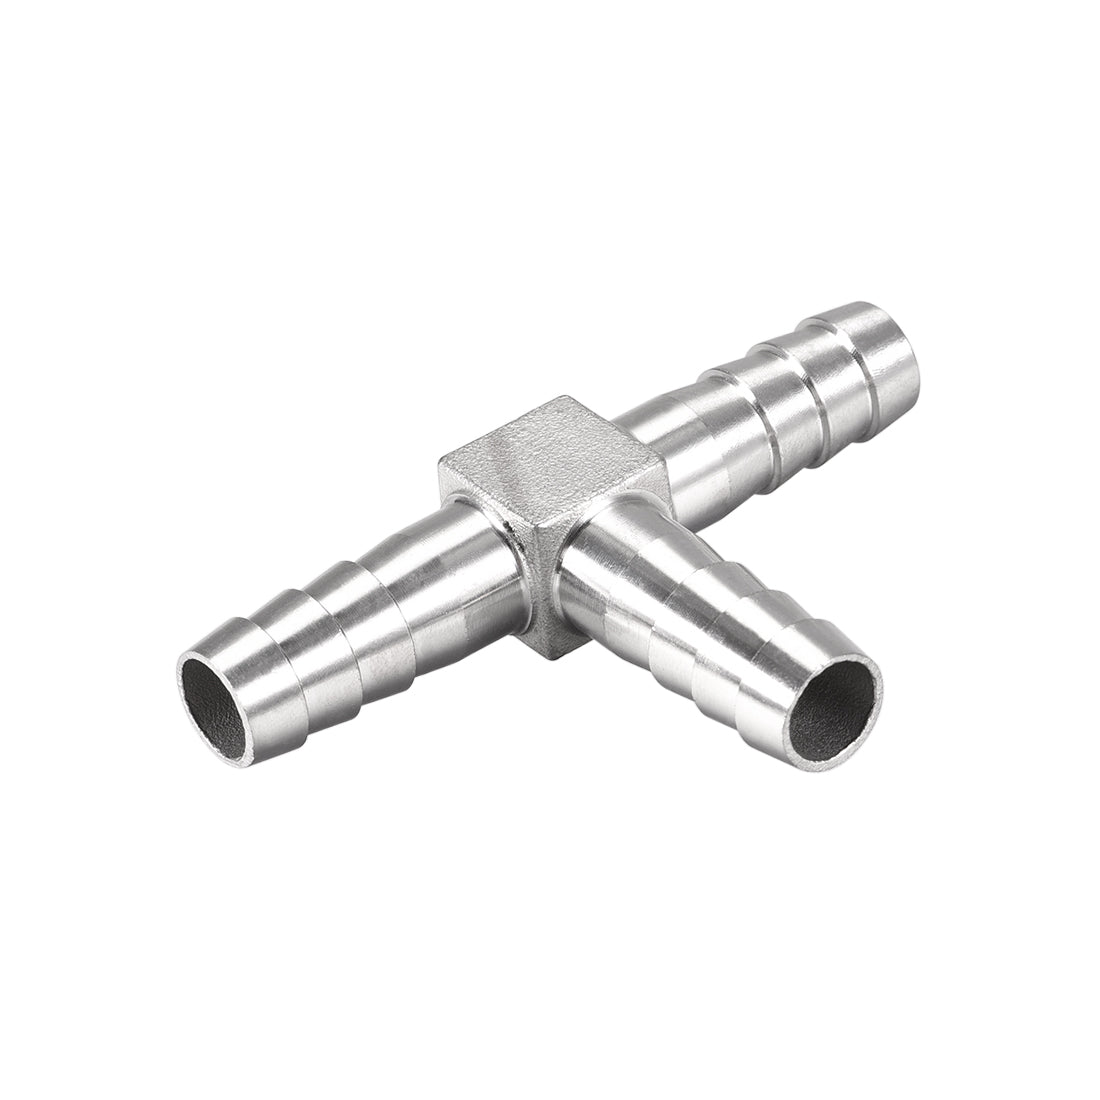 uxcell Uxcell 1/2-Inch (13mm) Hose ID Barb Fitting Stainless Steel 3 Way T Shaped Union Home Brew Fitting